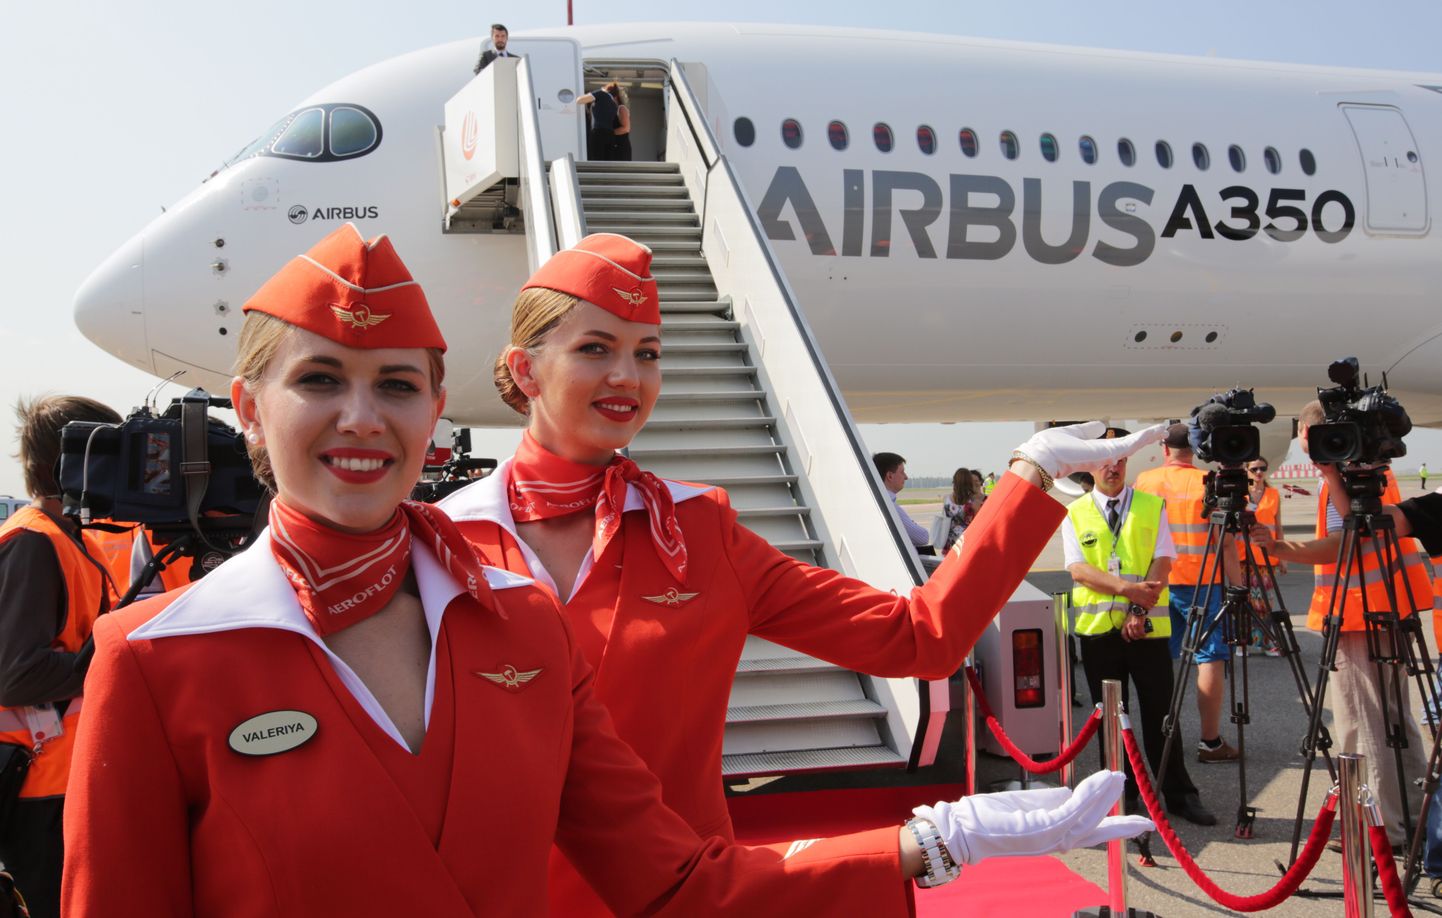 ITAR-TASS: MOSCOW REGION, RUSSIA. AUGUST 12, 2014. Stewardesses stand by a new Airbus A 350-900 aircraft with a wide fuselage at Sheremetyevo International Airport. (Photo ITAR-TASS/ Marina Lystseva)